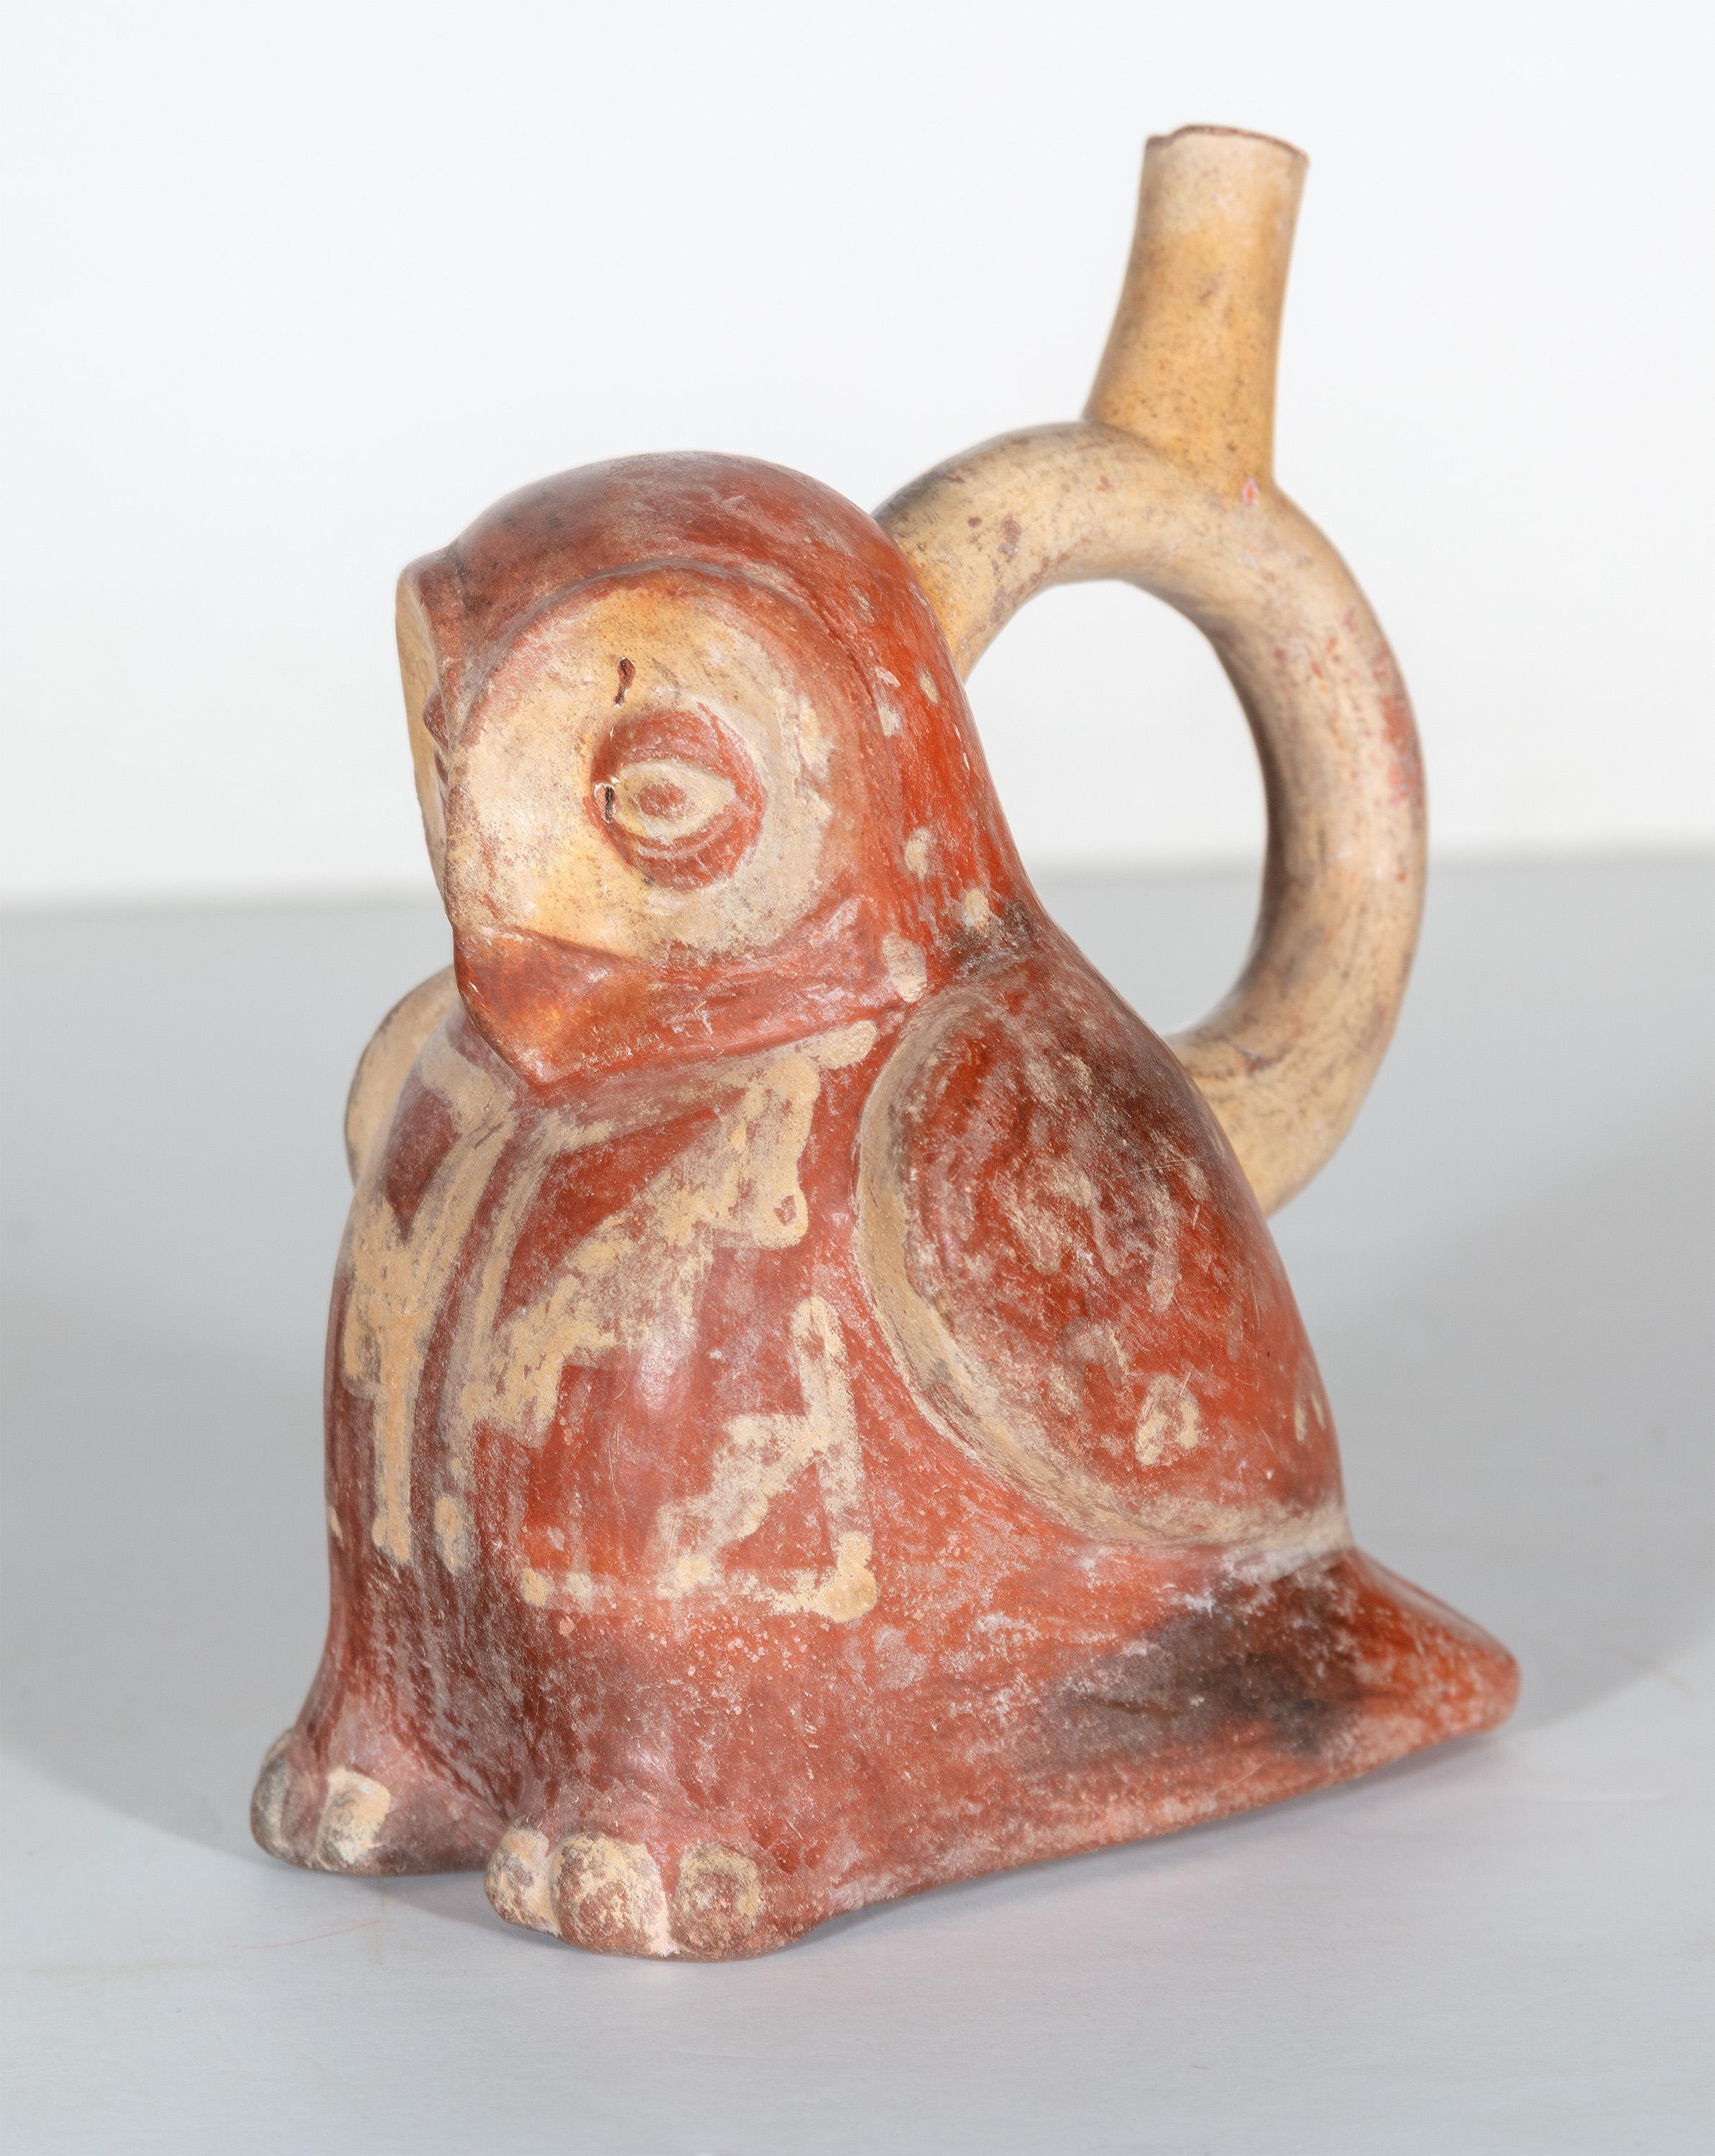 What are the Moche known for?